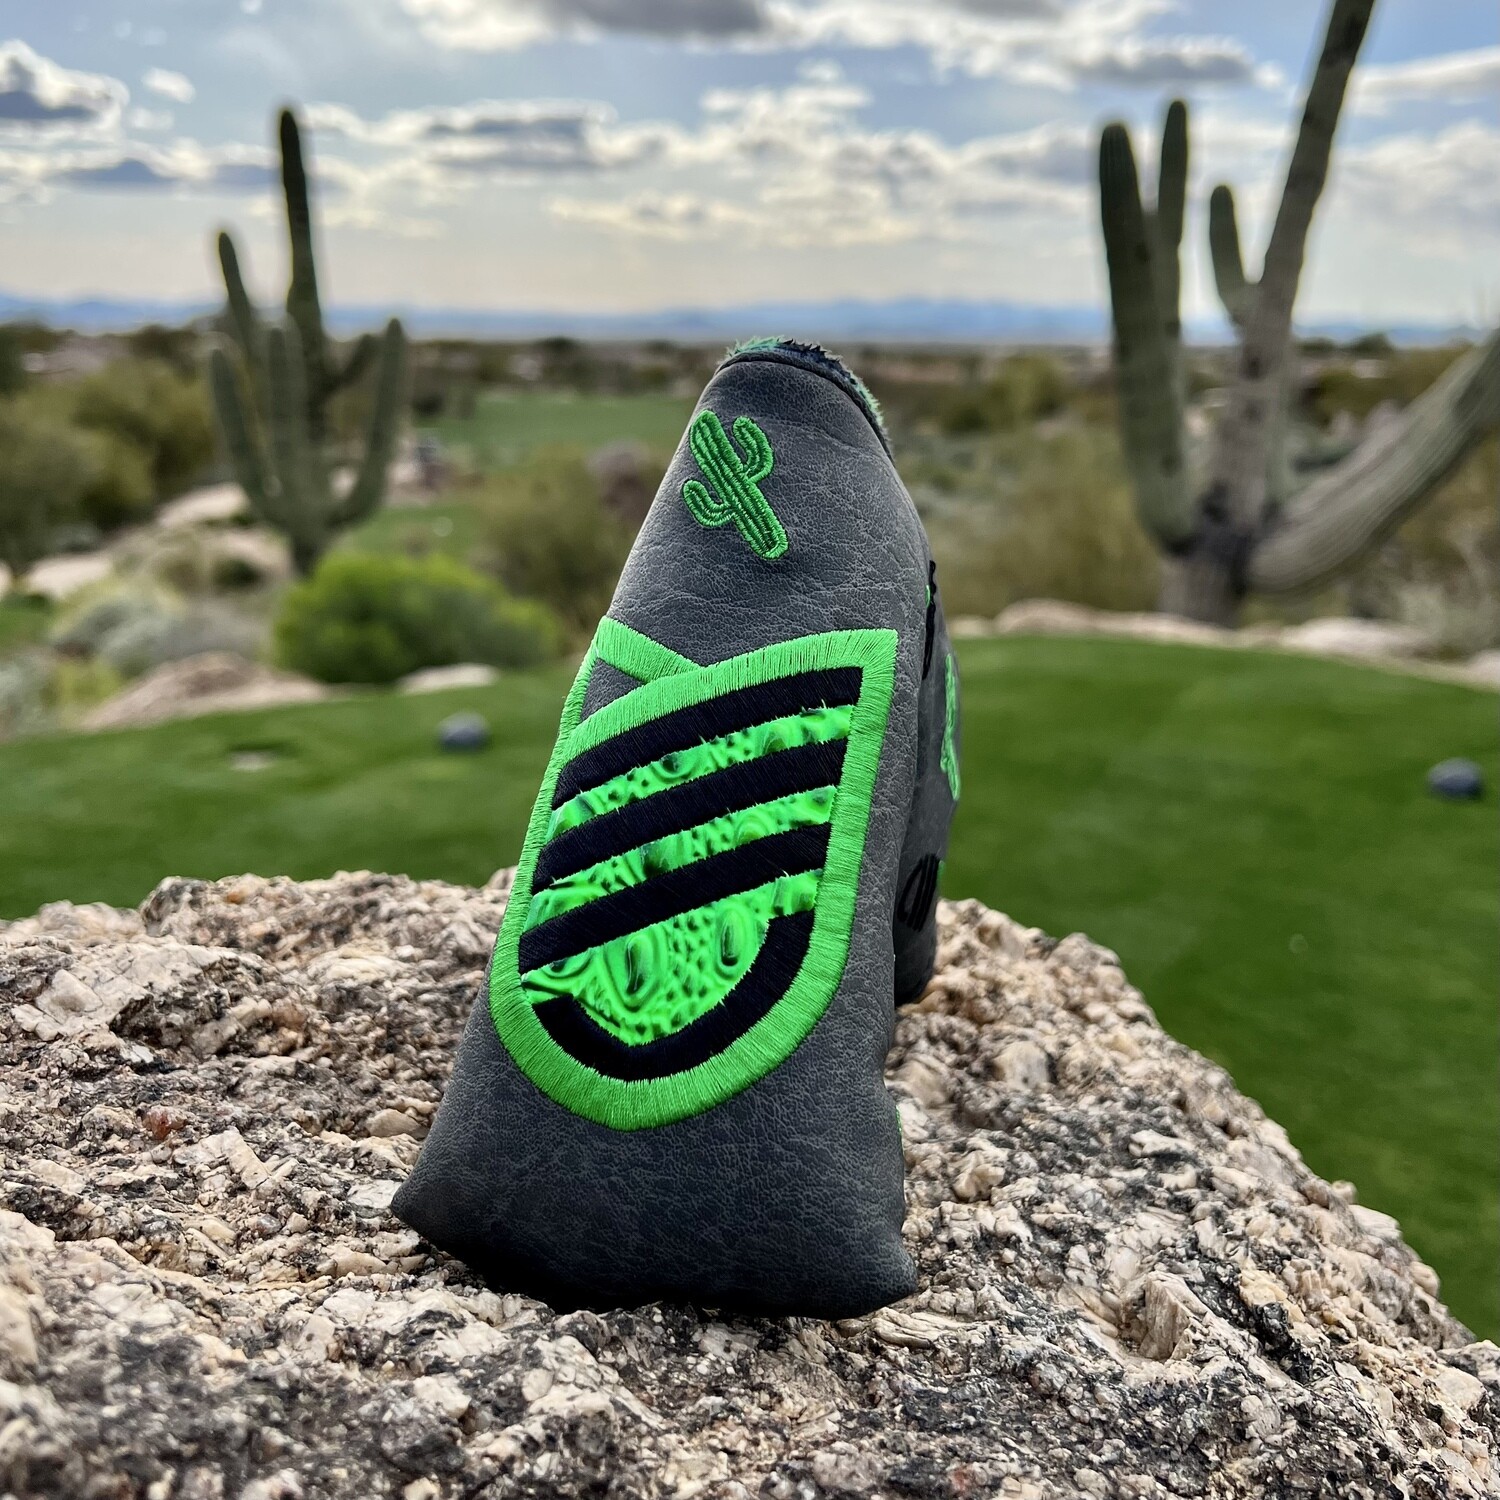 Limited Edition Mutant Cactus Headcover